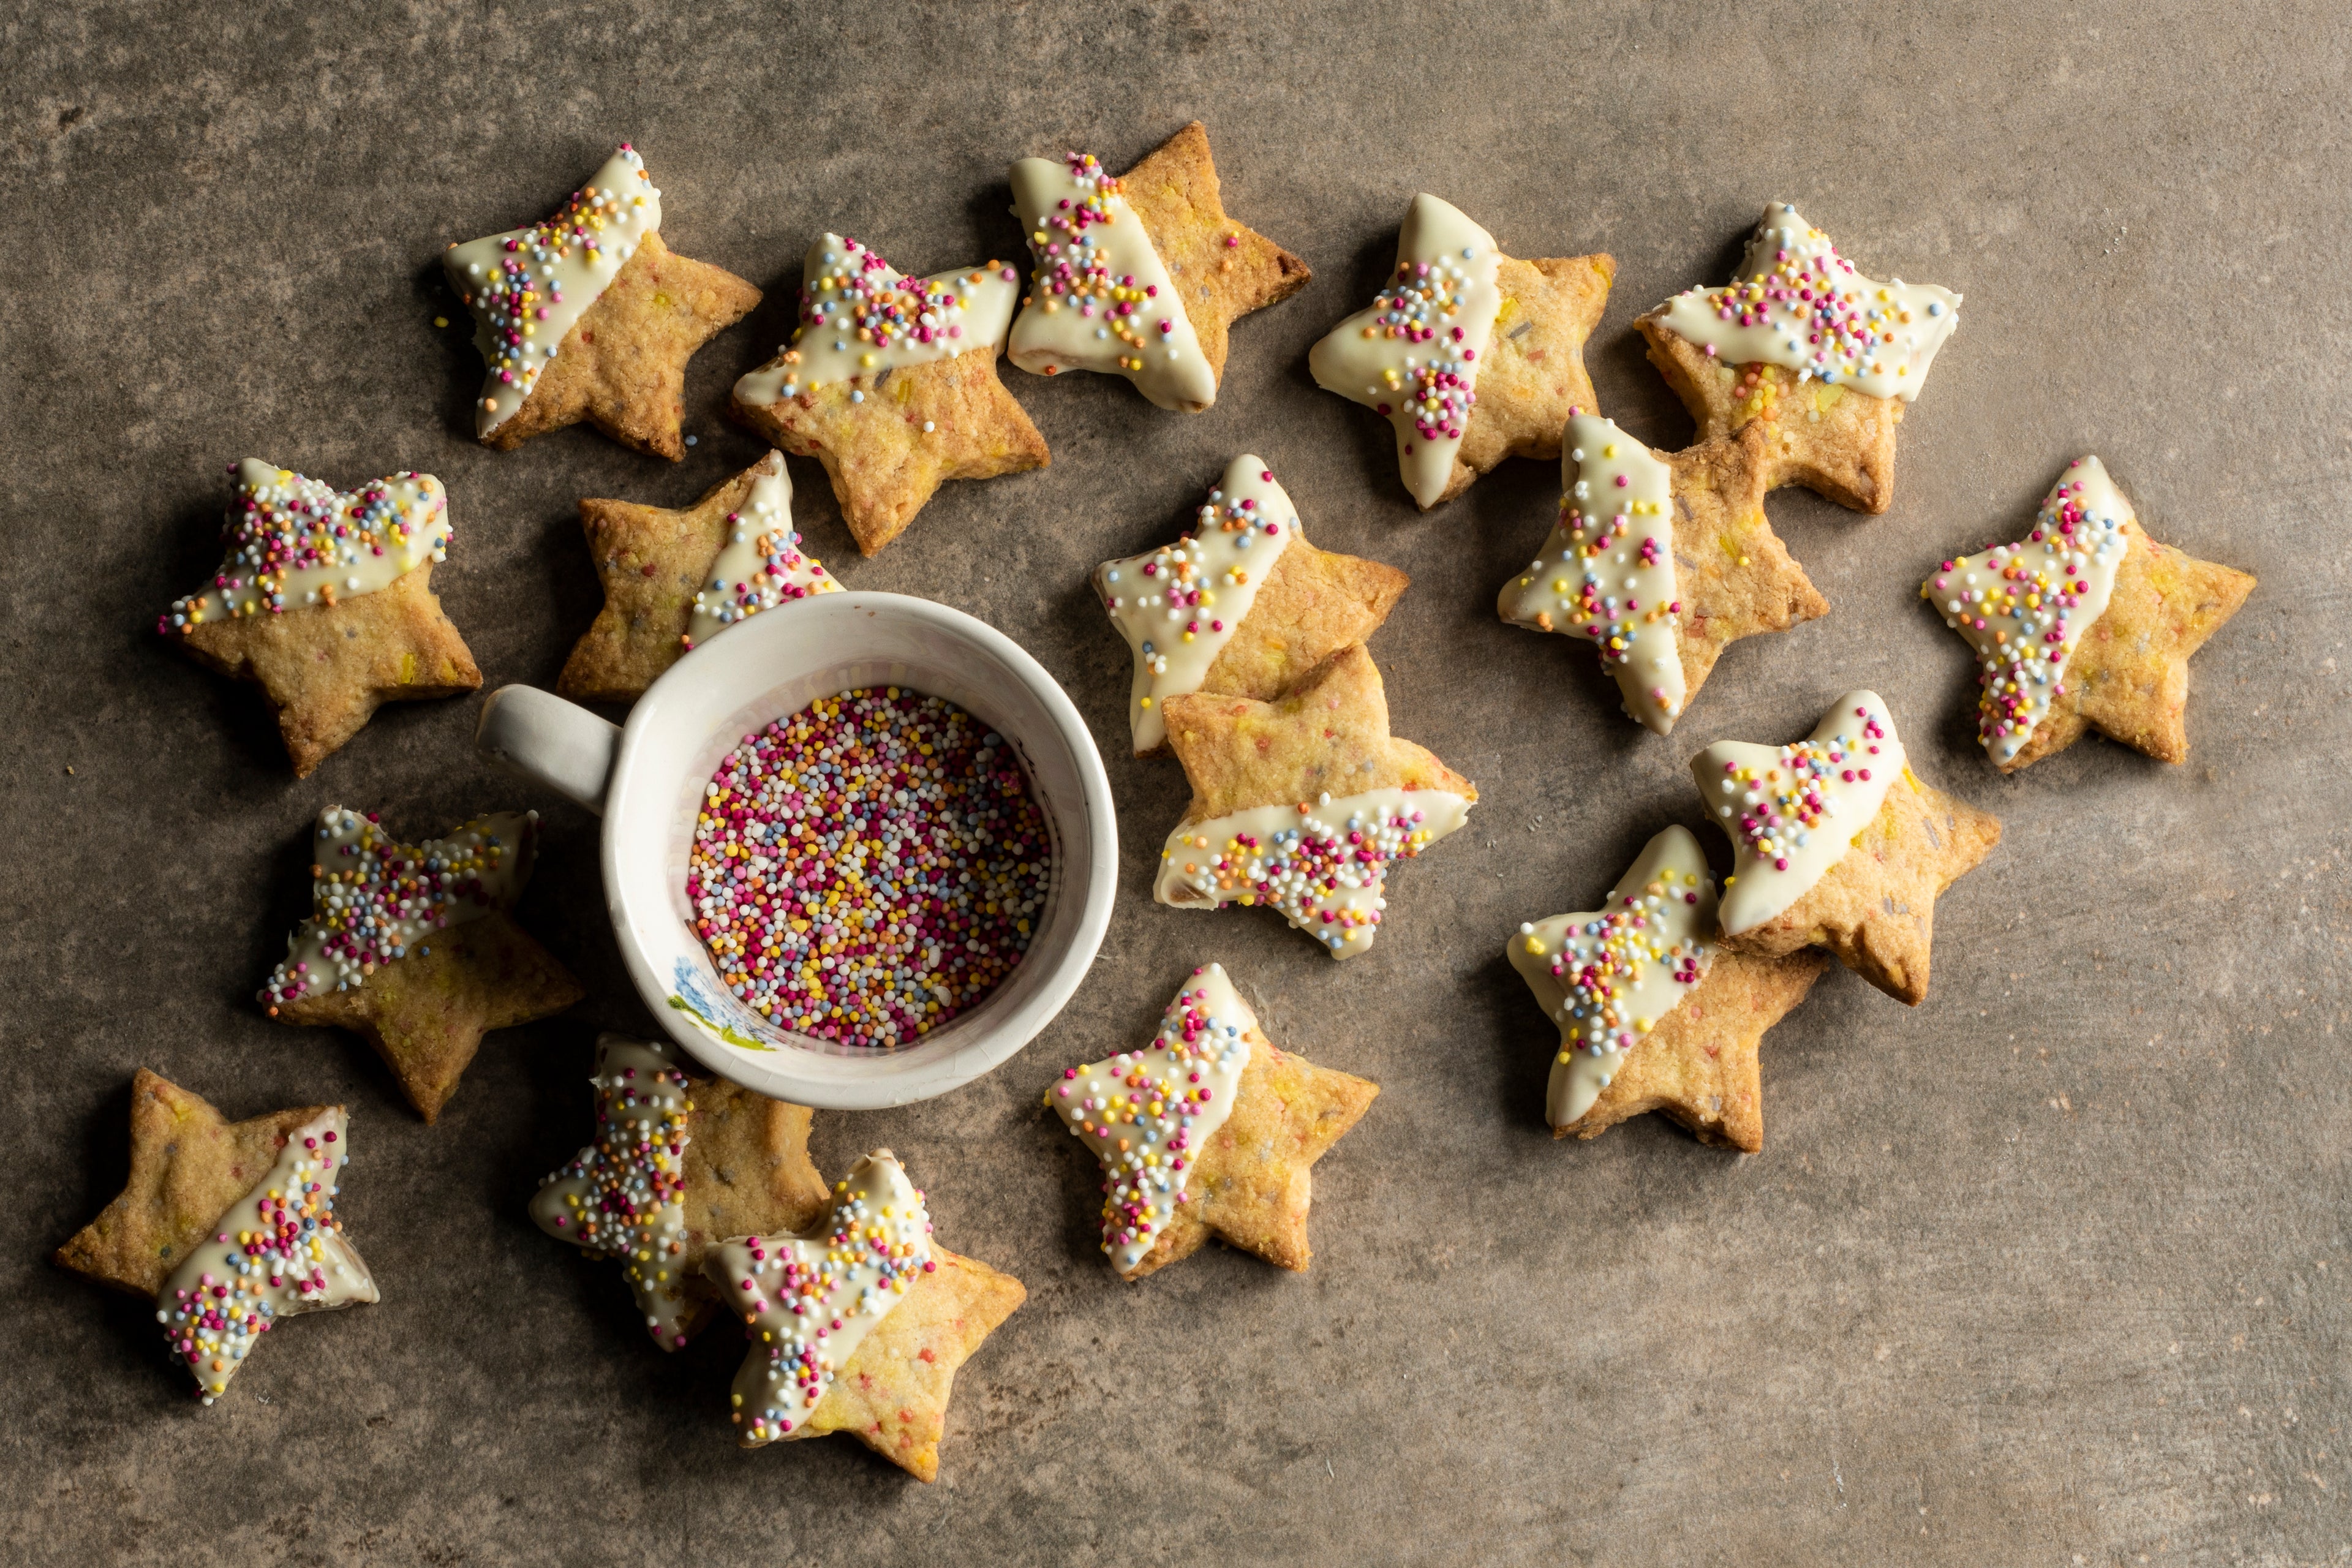 Star biscuits scattered around a small pot of sprinkles